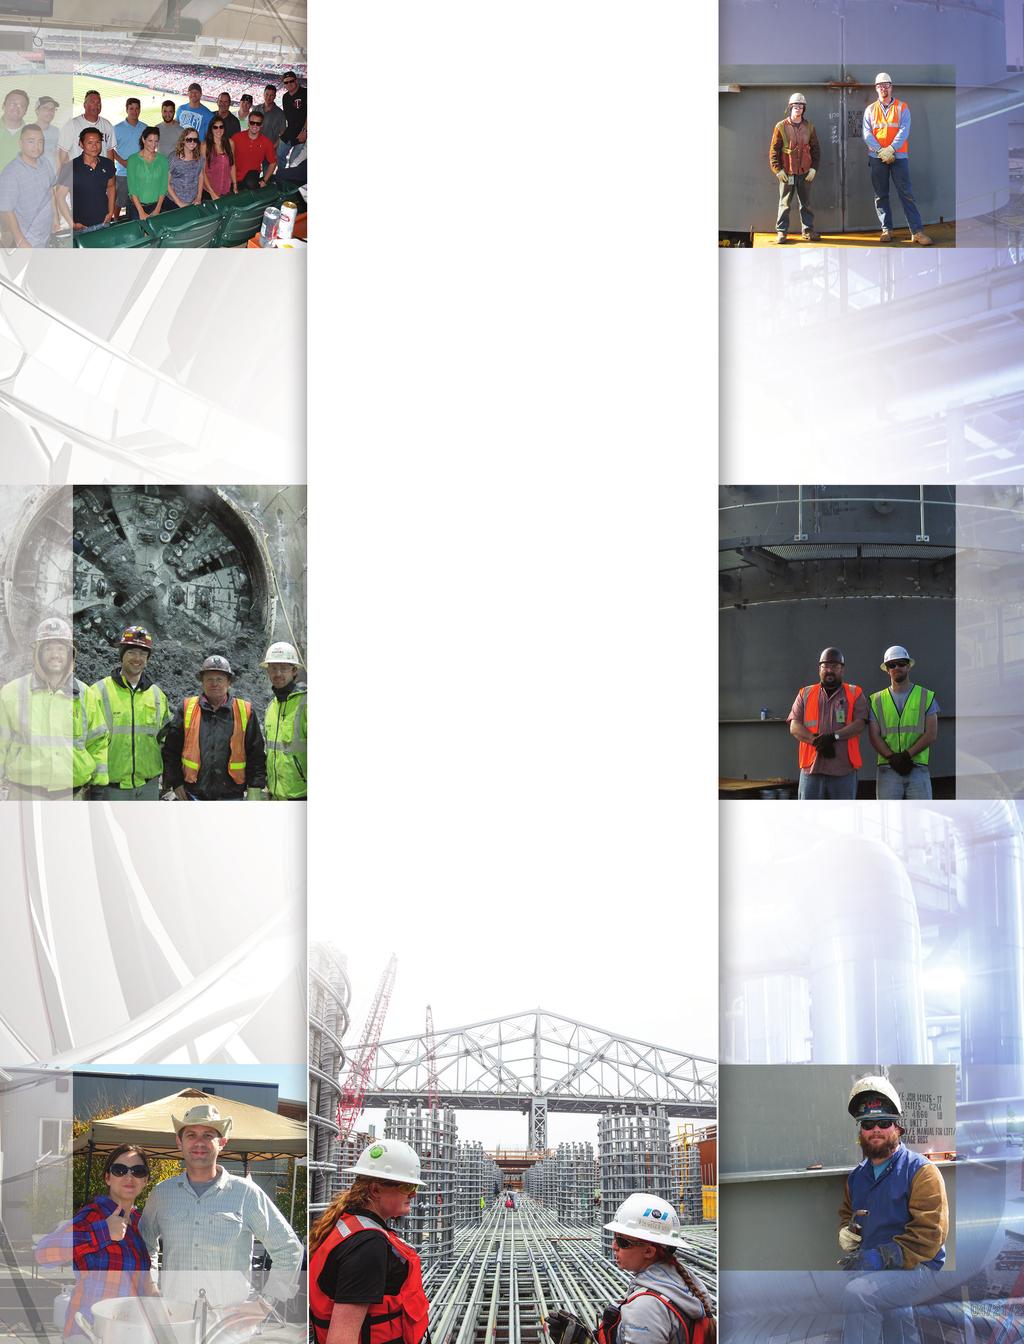 TRAYLOR S VISION To be the most respected, preferred and consistently performing heavycivil contractor in North America.